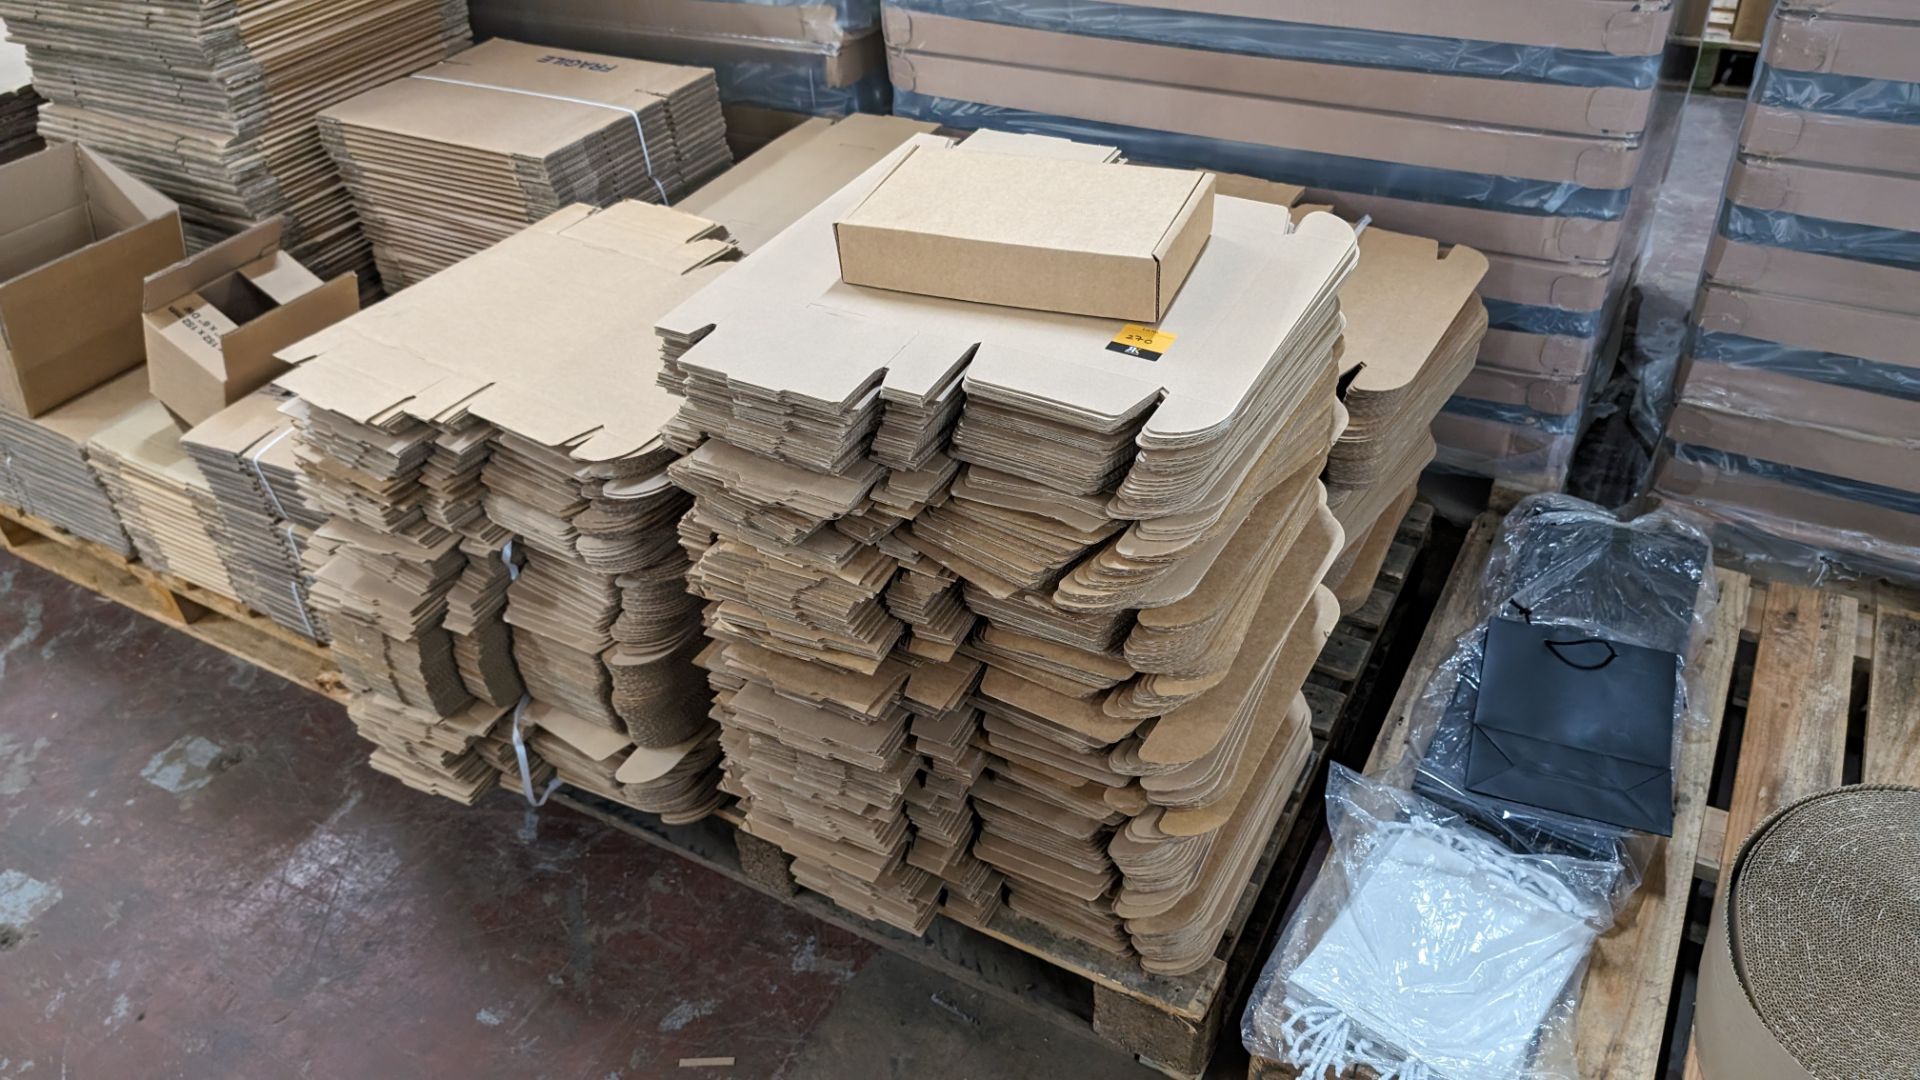 The contents of a pallet of flatpack boxes, each box incorporates a self-closing hinged lid and box